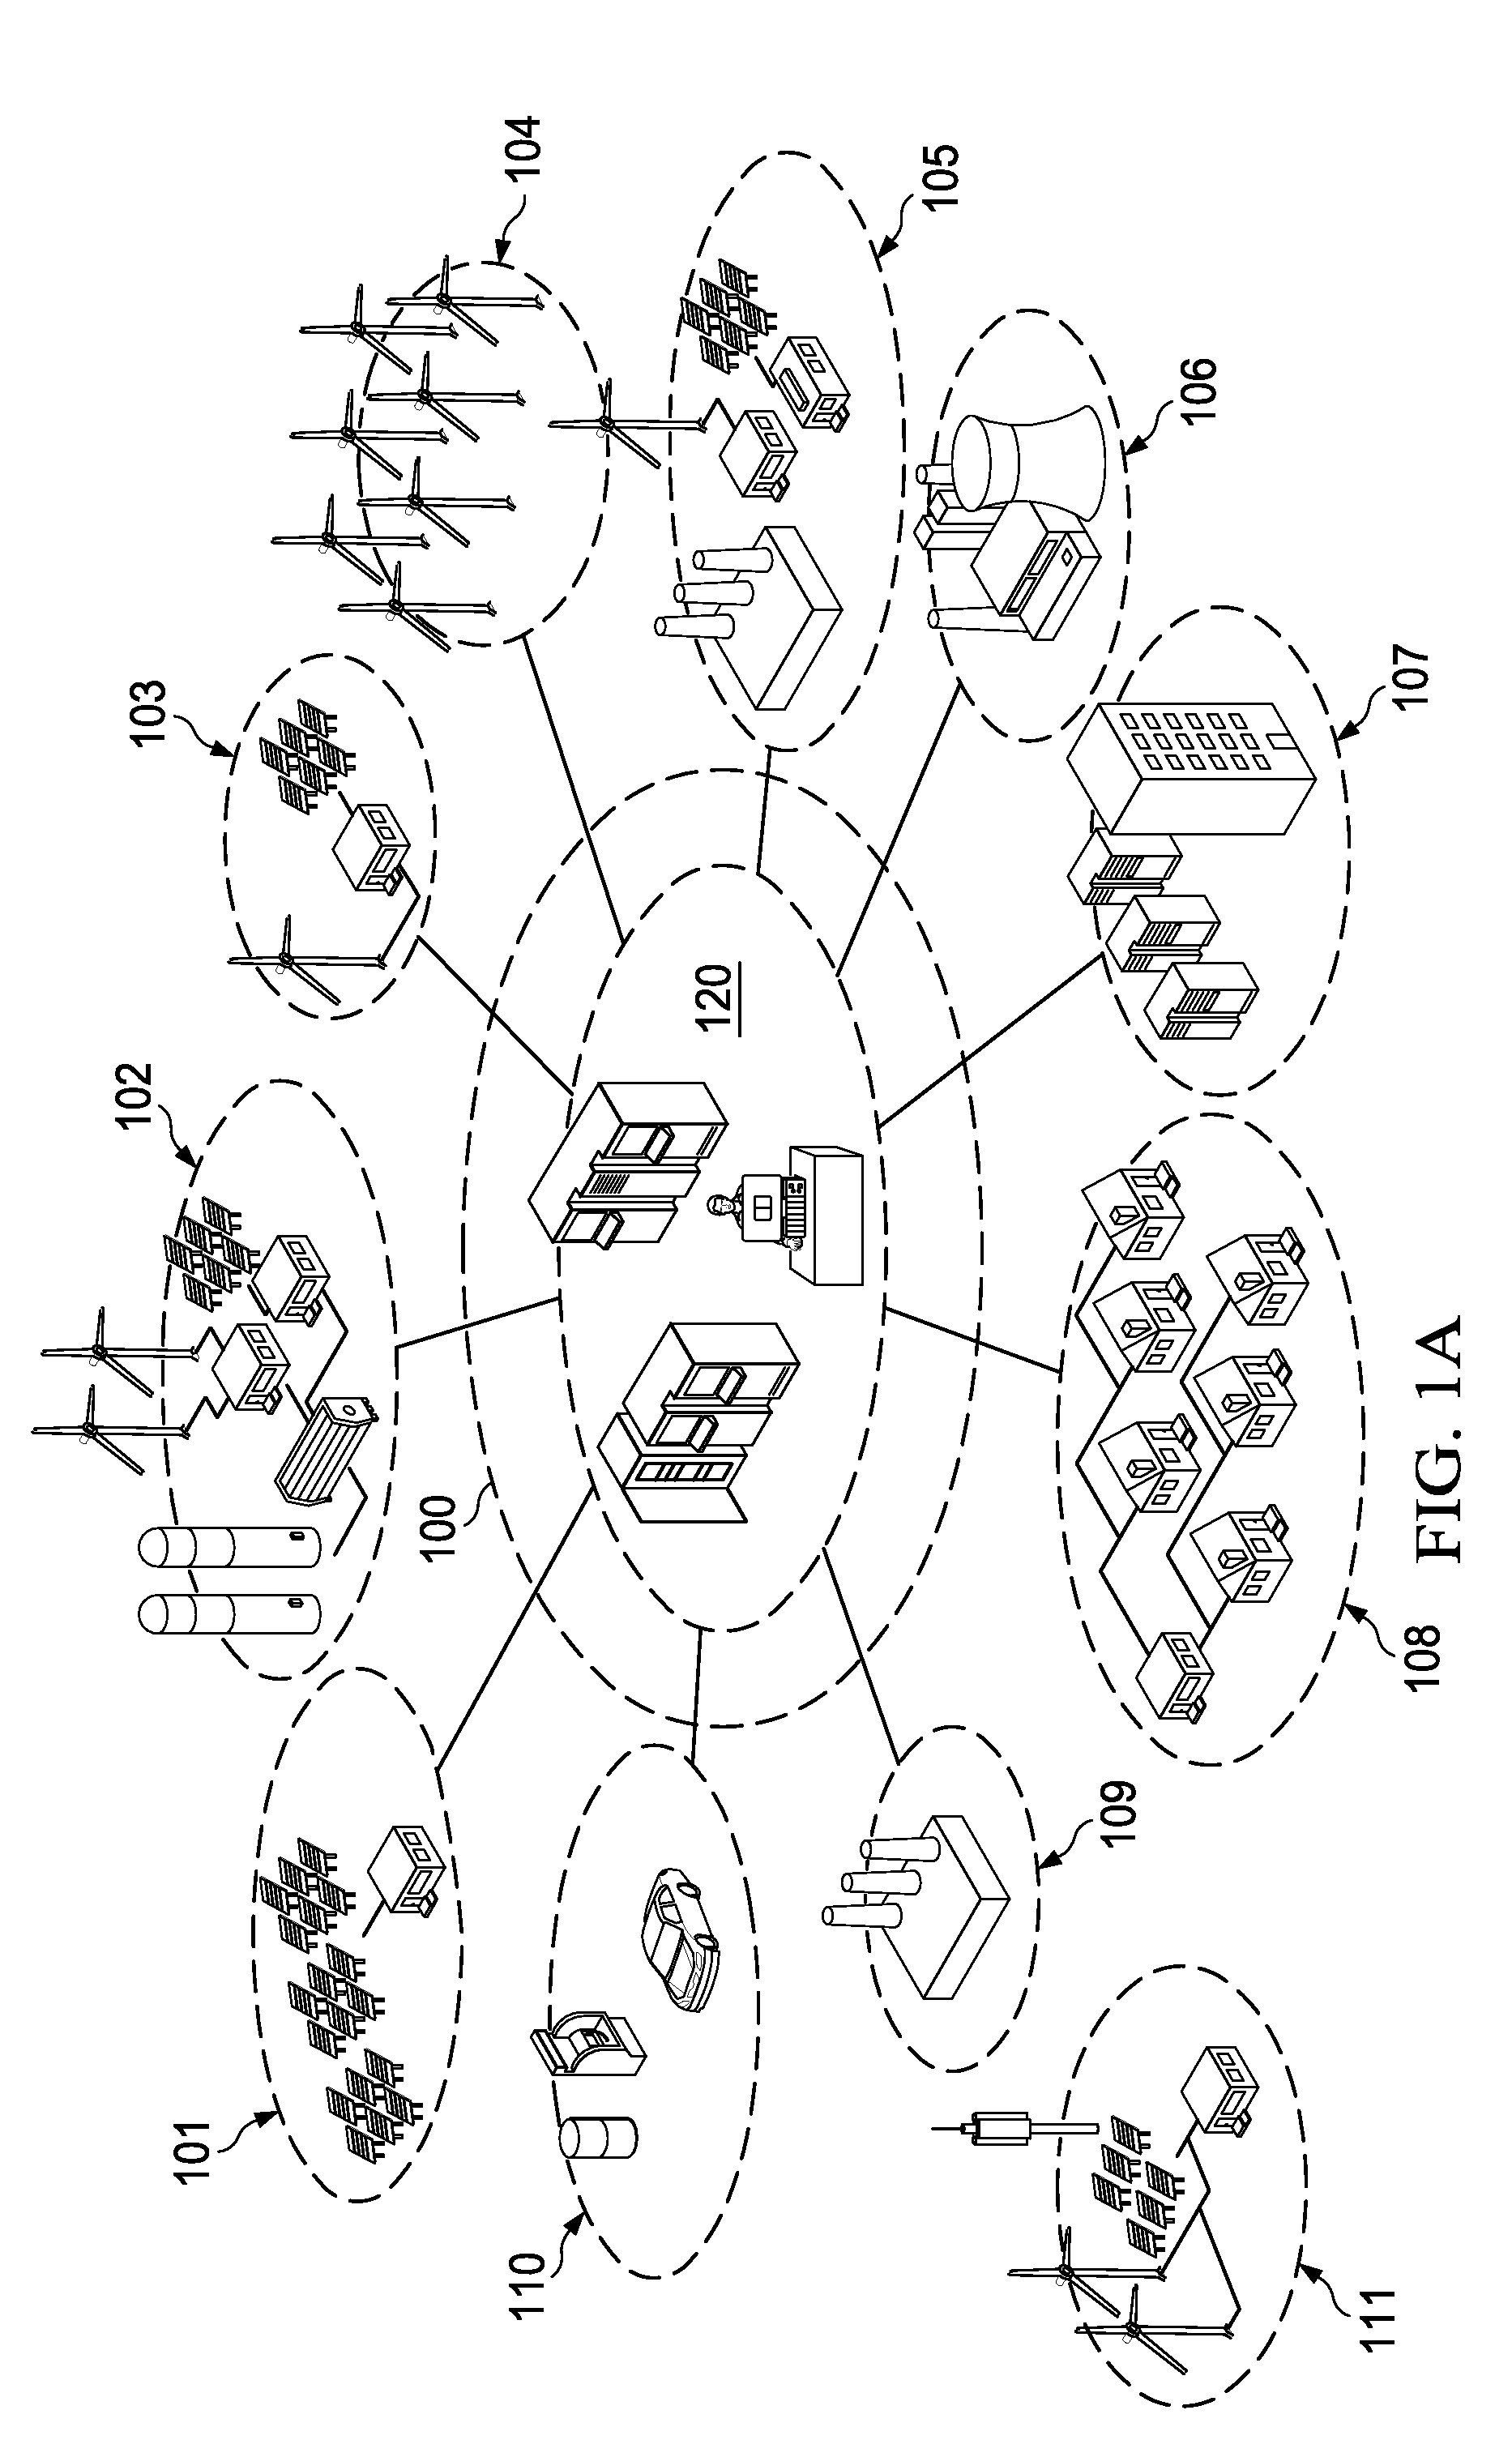 Methods for Anti-islanding in distributed-source electrical power generation and distribution systems and electrical systems and apparatus using same